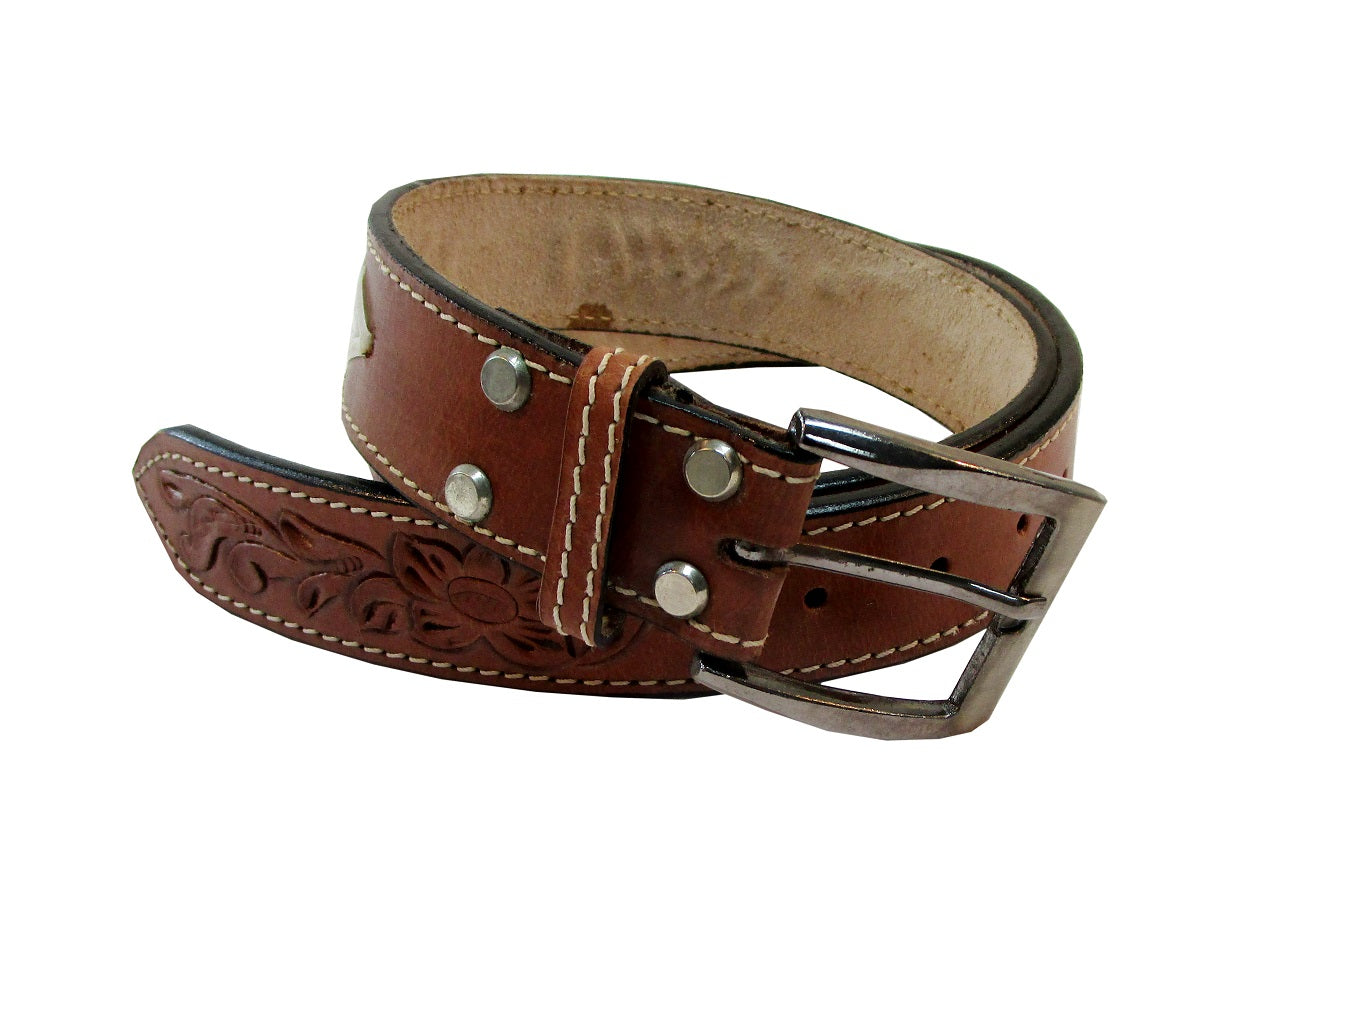 F&L CLASSIC Men's Genuine full grain leather belt heavy duty, work or  casual belts for jeans, triple Prong buckle,1.5” wide,3193,size 32,tan at  Amazon Men's Clothing store